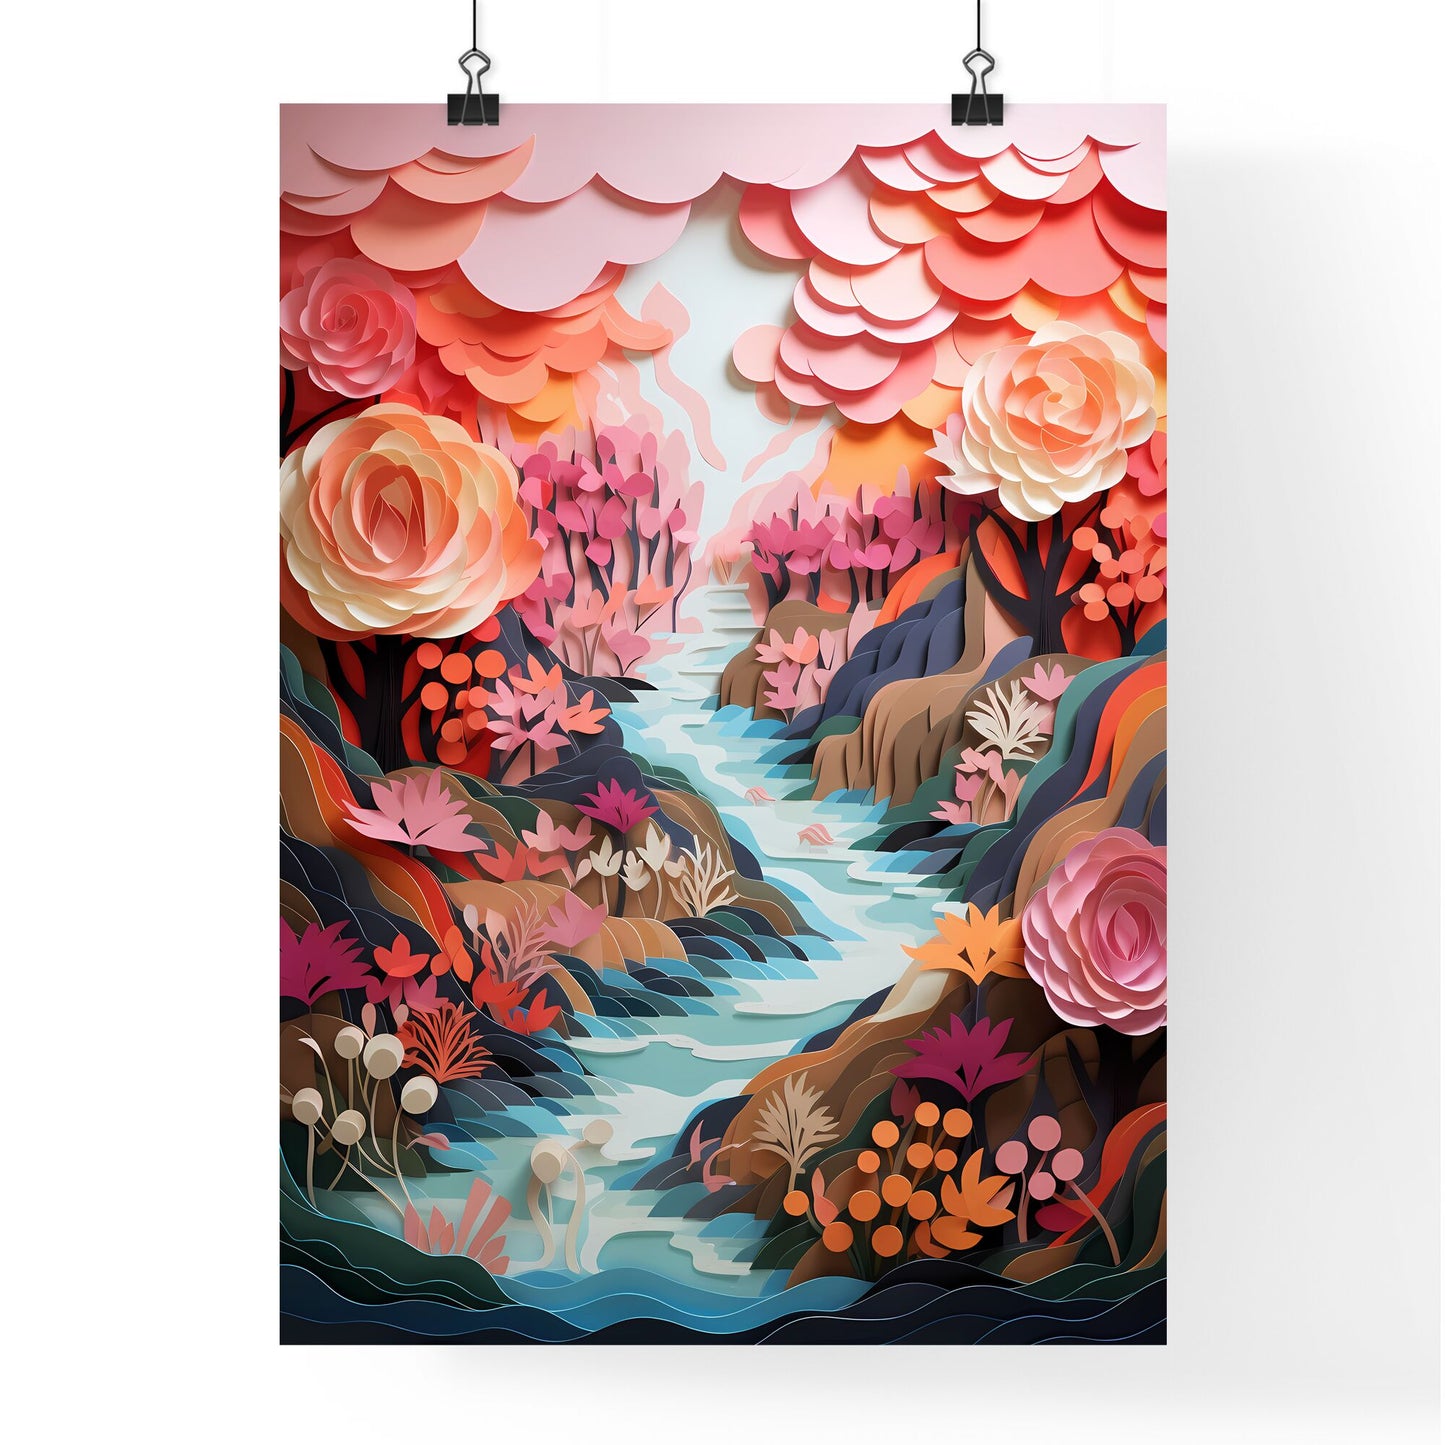 Paper Cut Out Of Flowers And A River Art Print Default Title